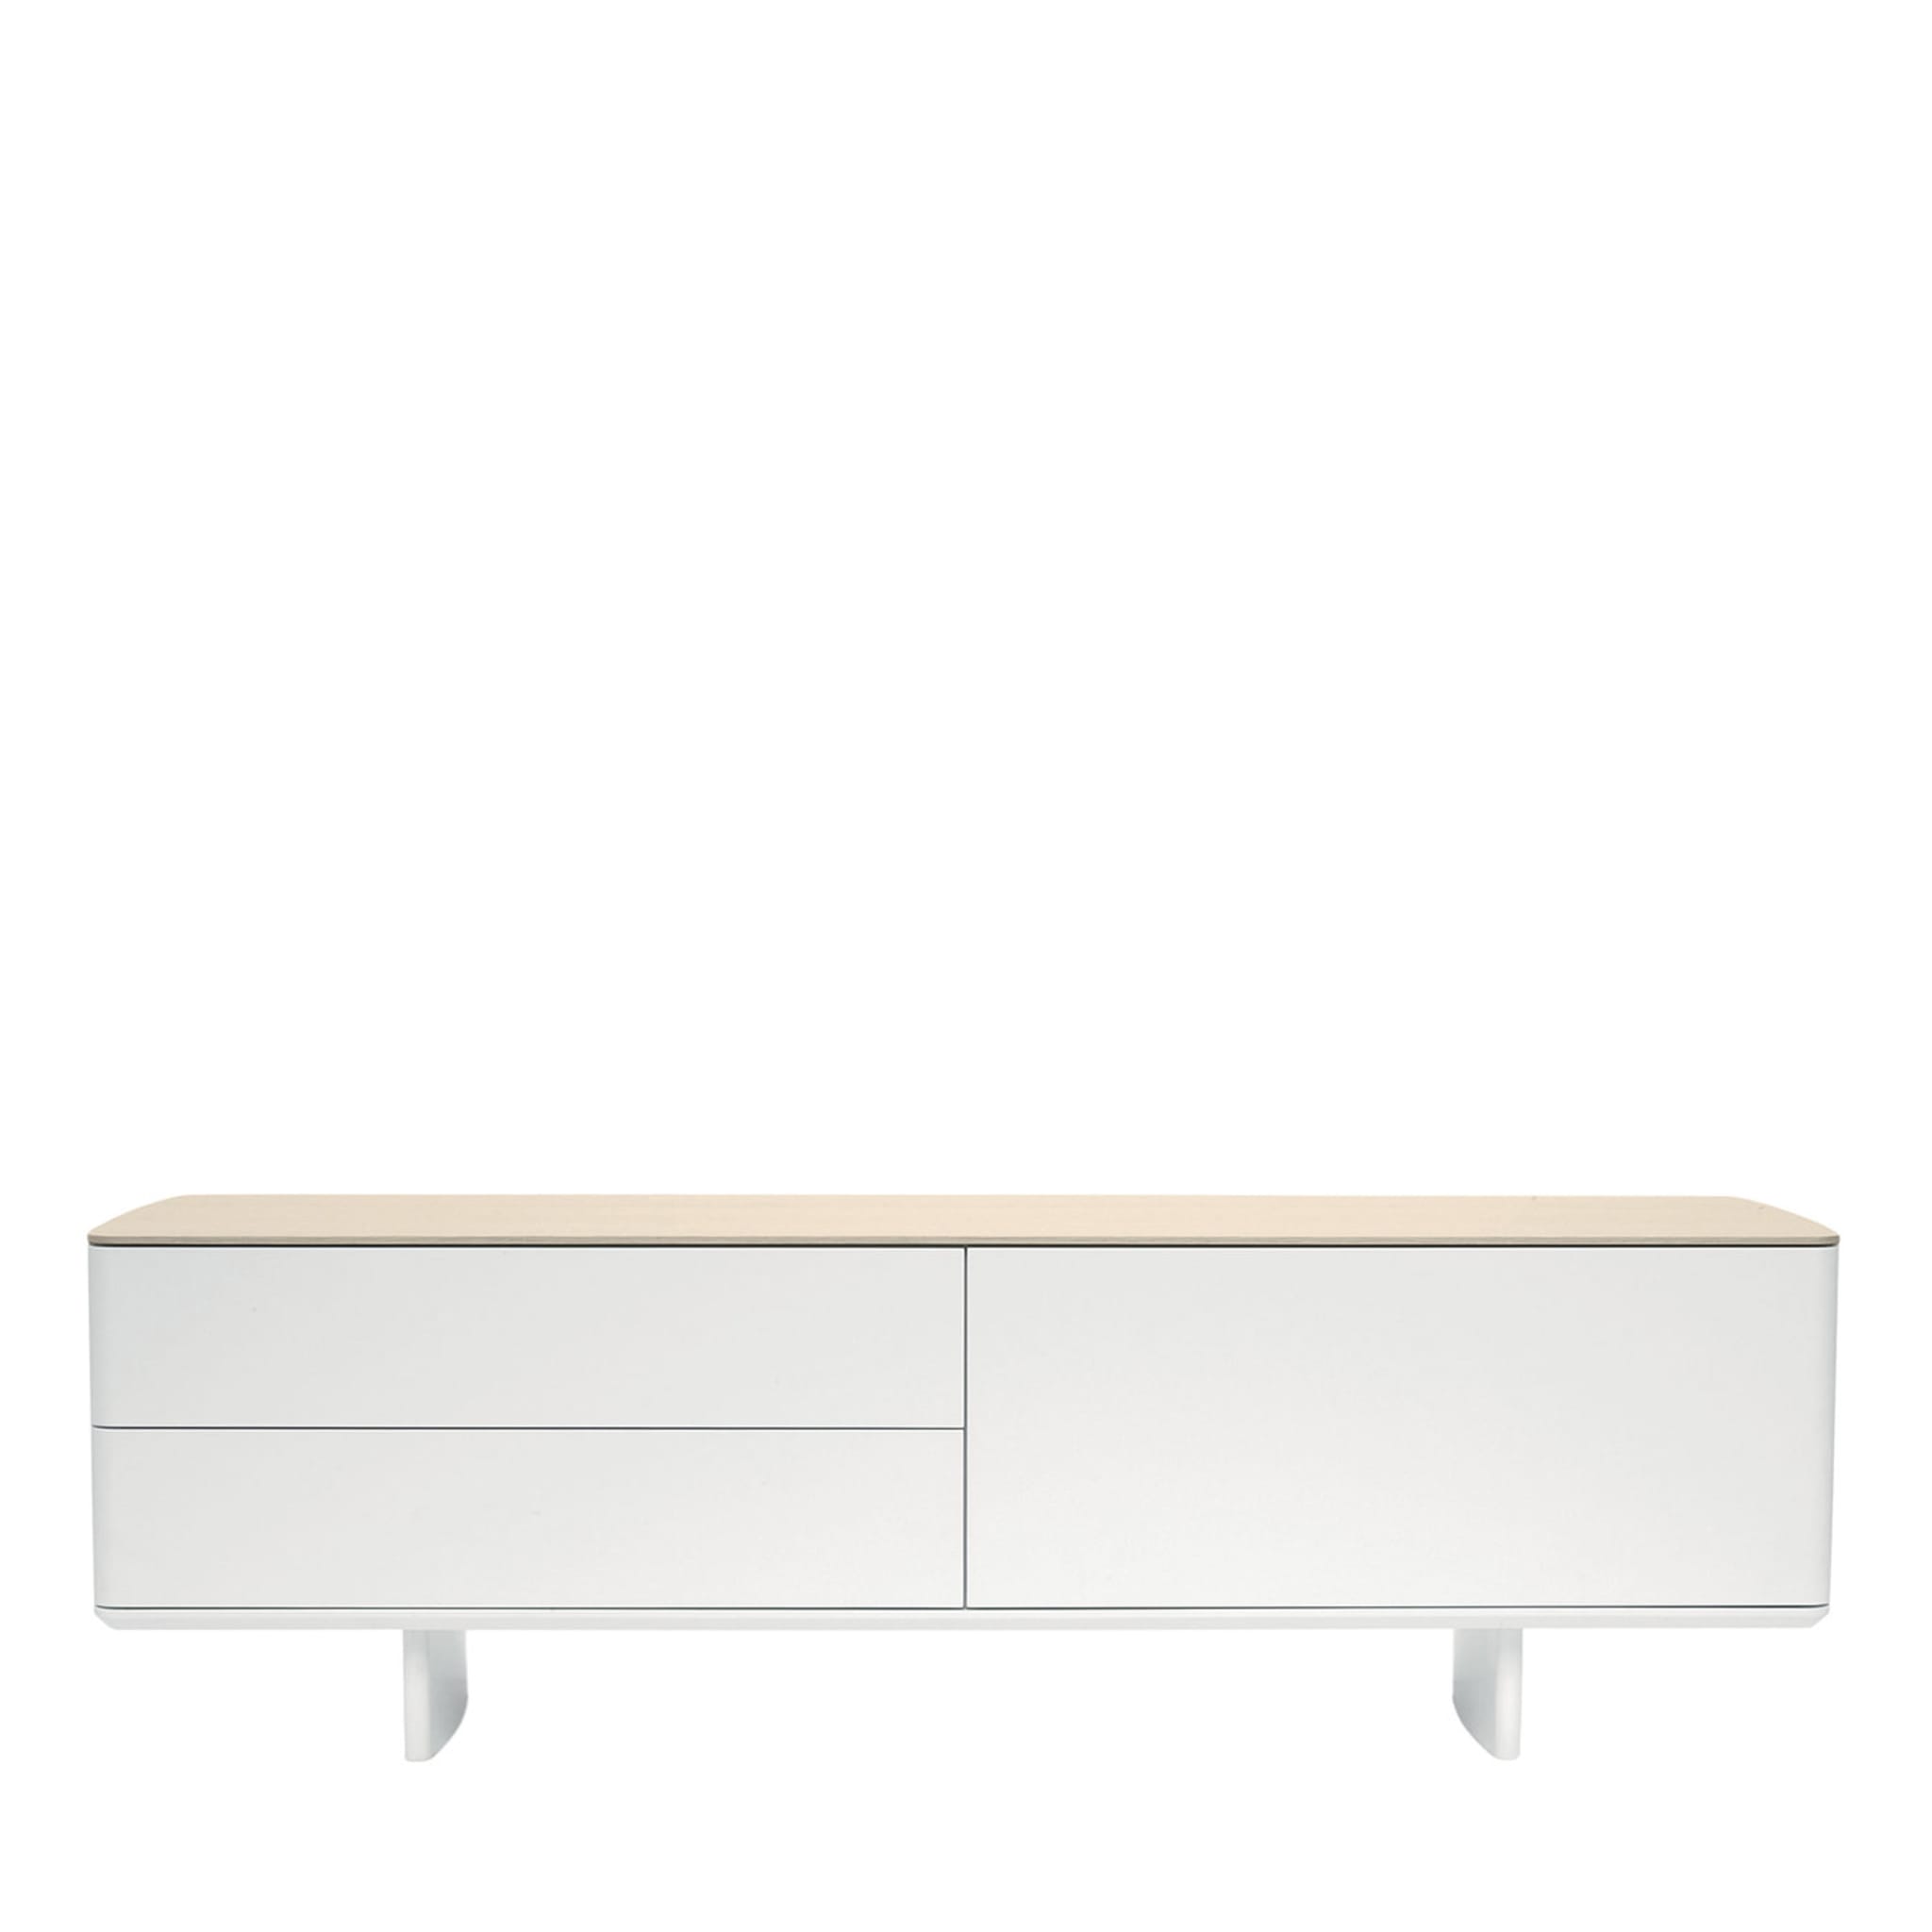 Shift White and Durmast Sideboard by Foster + Partners - Main view